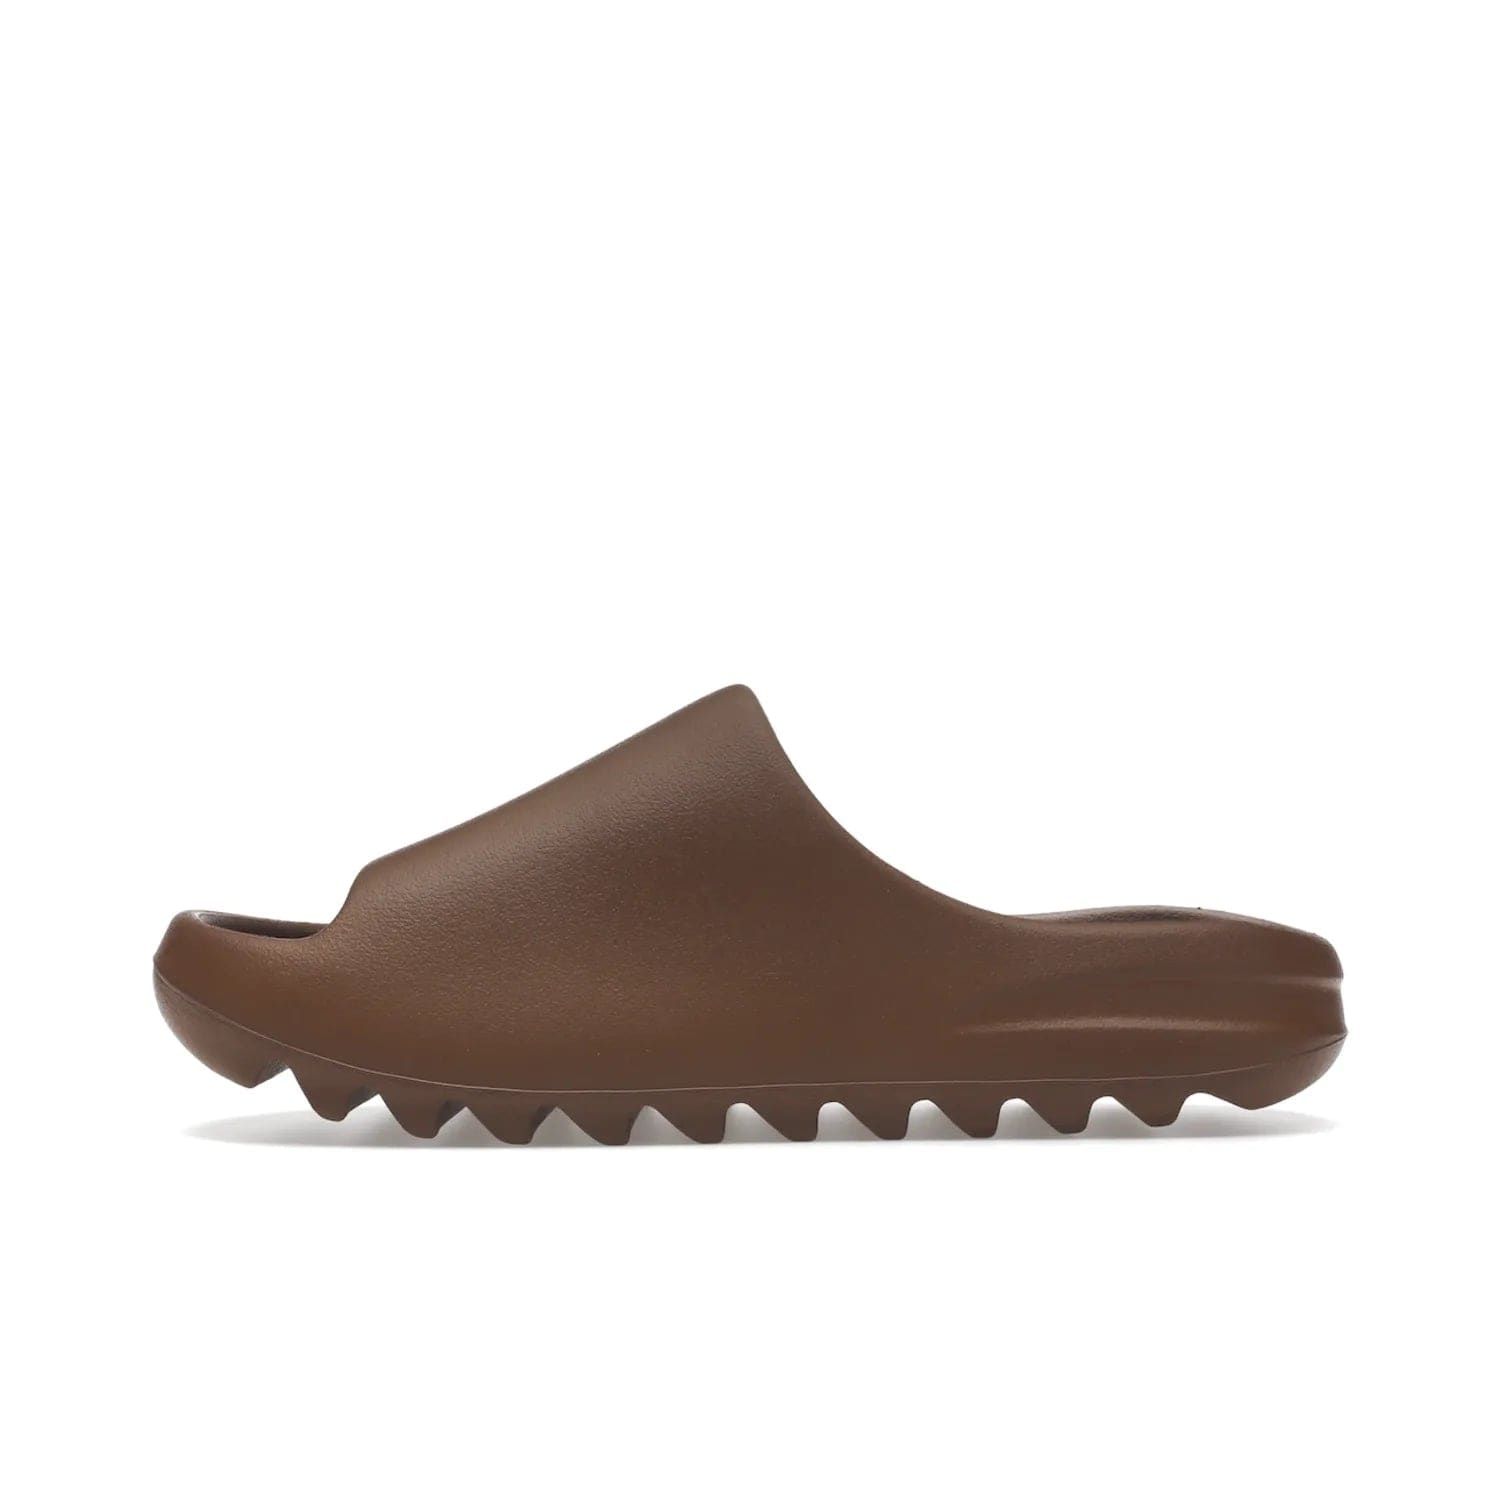 adidas Yeezy Slide Flax - Image 19 - Only at www.BallersClubKickz.com - Score the perfect casual look with the adidas Yeezy Slide Flax. Made with lightweight injected EVA plus horizontal grooves underfoot for traction. Release on August 22, 2022. $70.